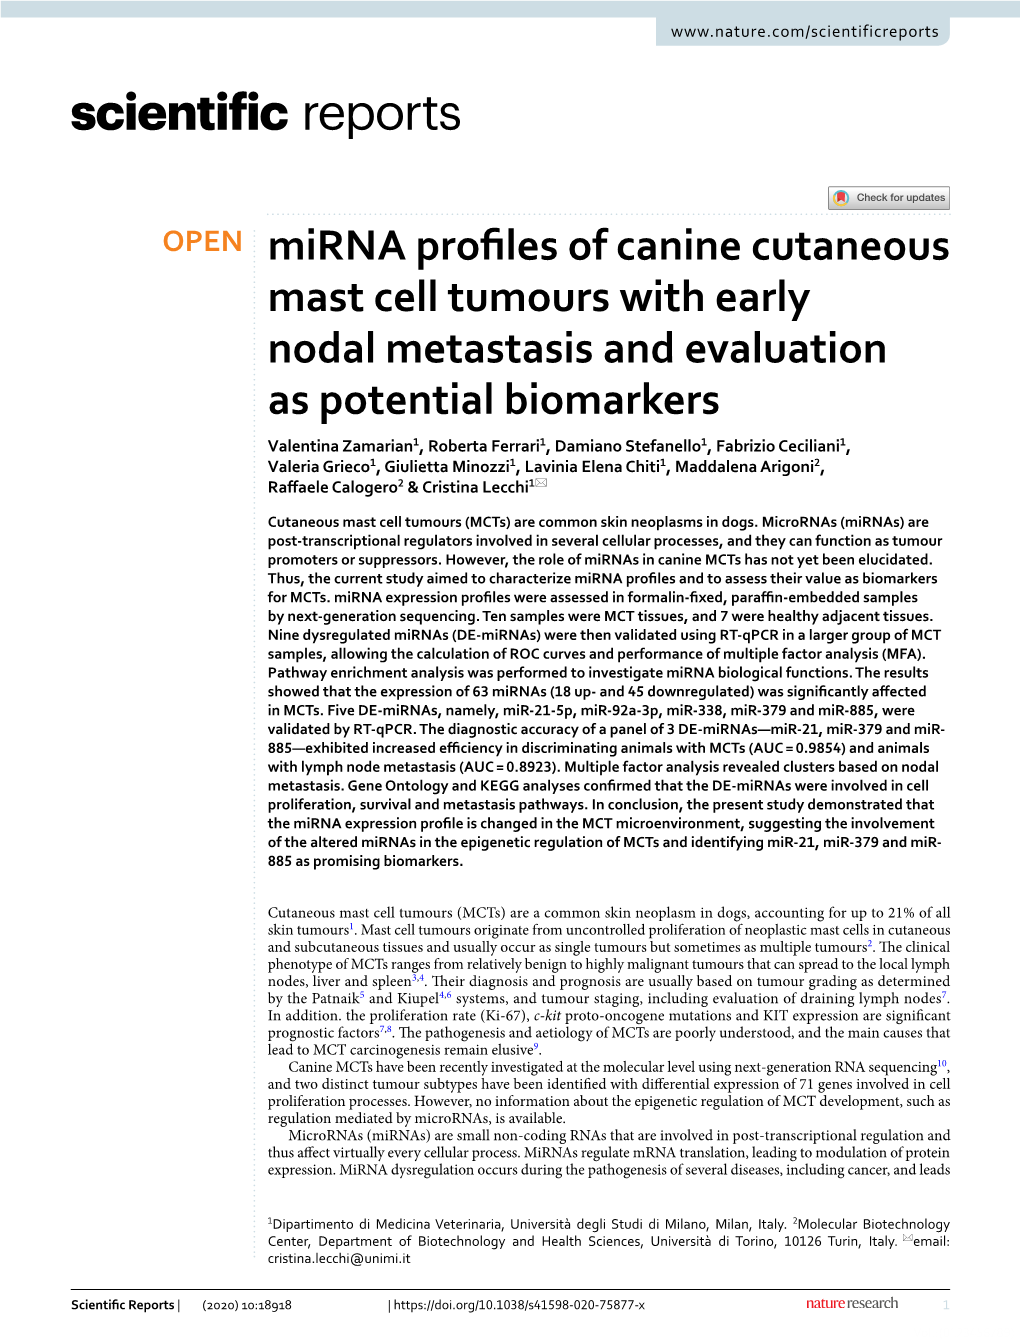 Mirna Profiles of Canine Cutaneous Mast Cell Tumours with Early Nodal Metastasis and Evaluation As Potential Biomarkers